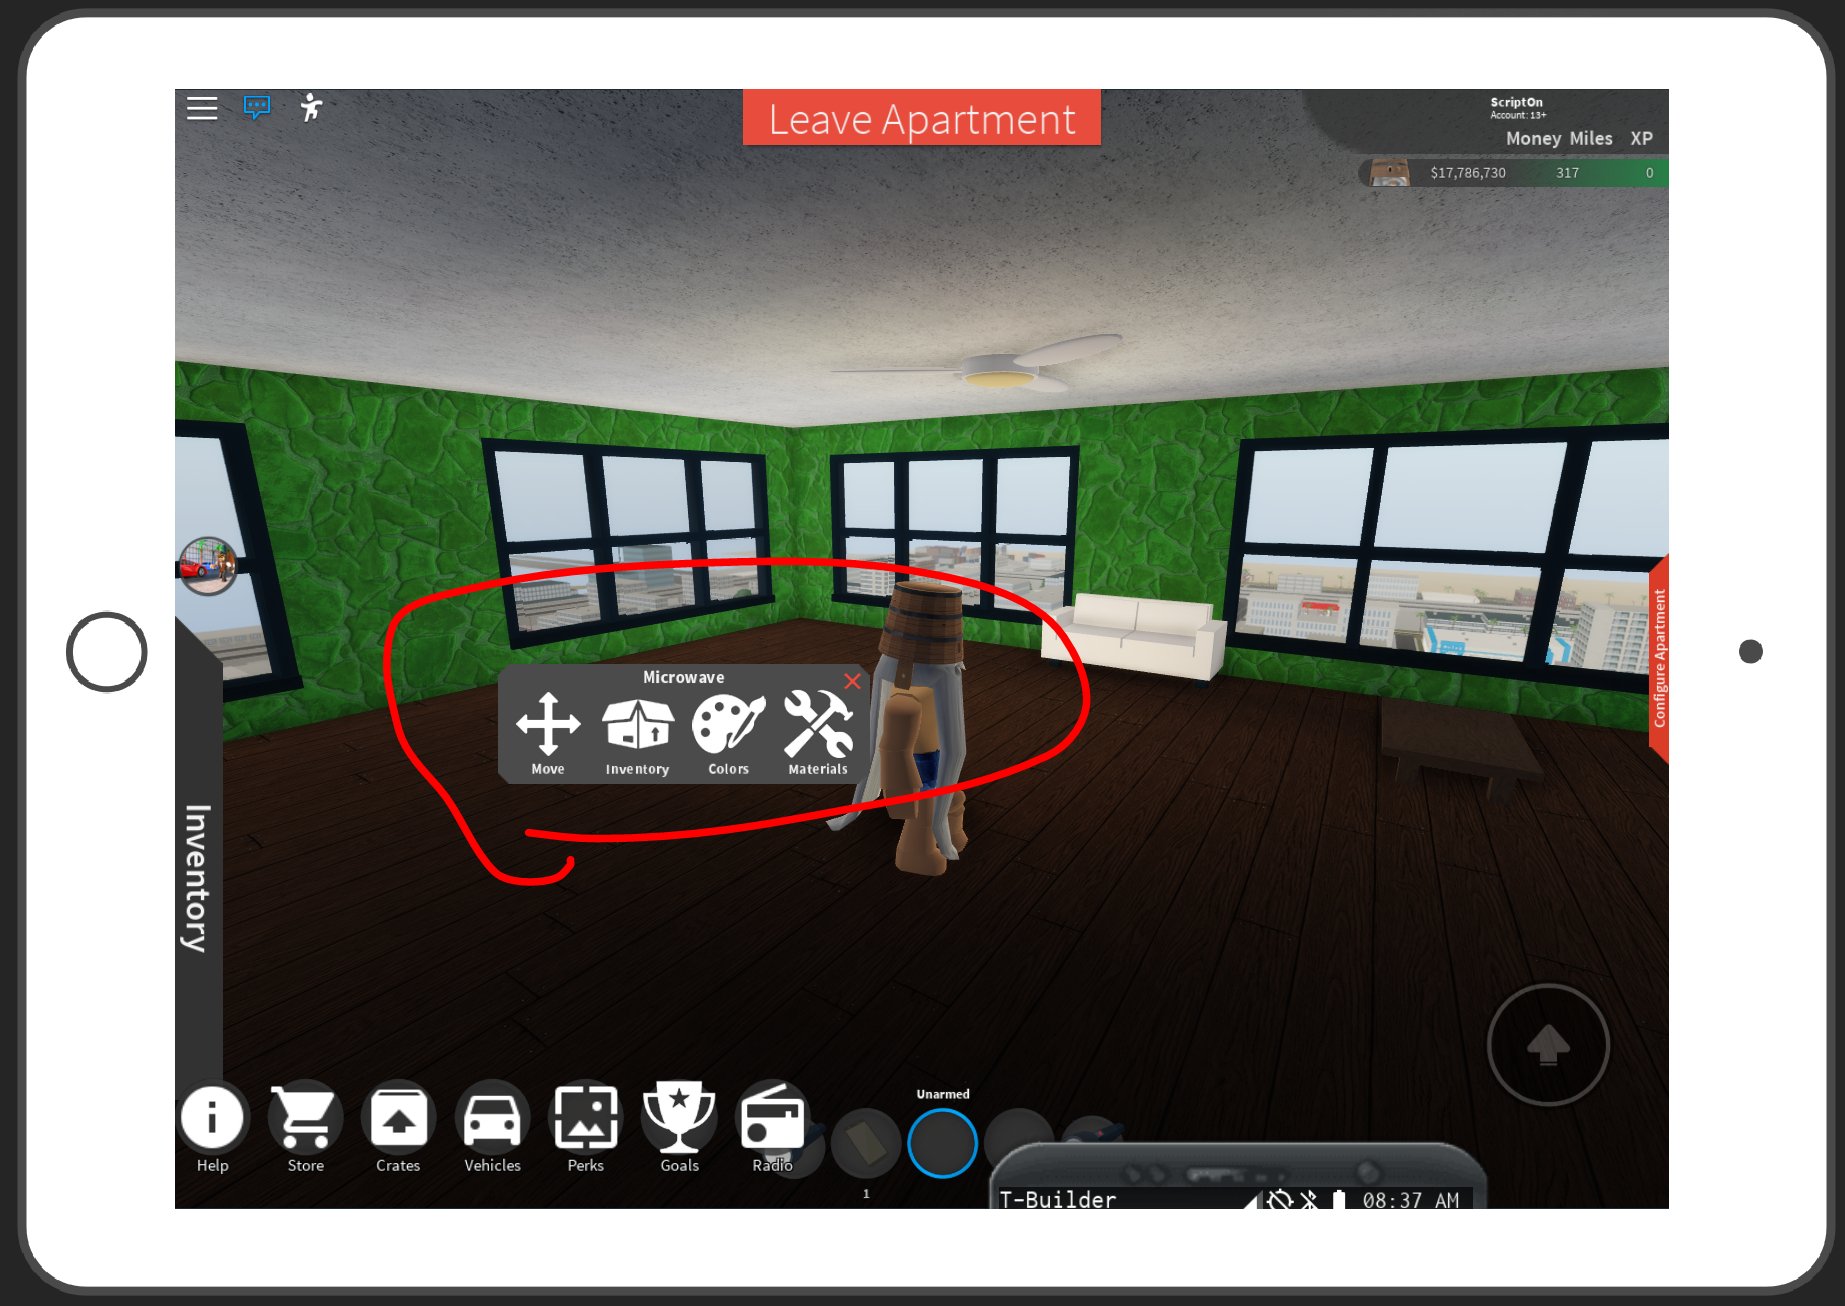 Scriptonroblox On Twitter Does Anyone Have Any Idea As To How I Can Use Billboardgui Textbuttons When They Re Hidden Behind The Mobile Controls Coregui Https T Co 9inxtl5rzz Https T Co P4wuuvp8es - roblox userinputservice mouse click